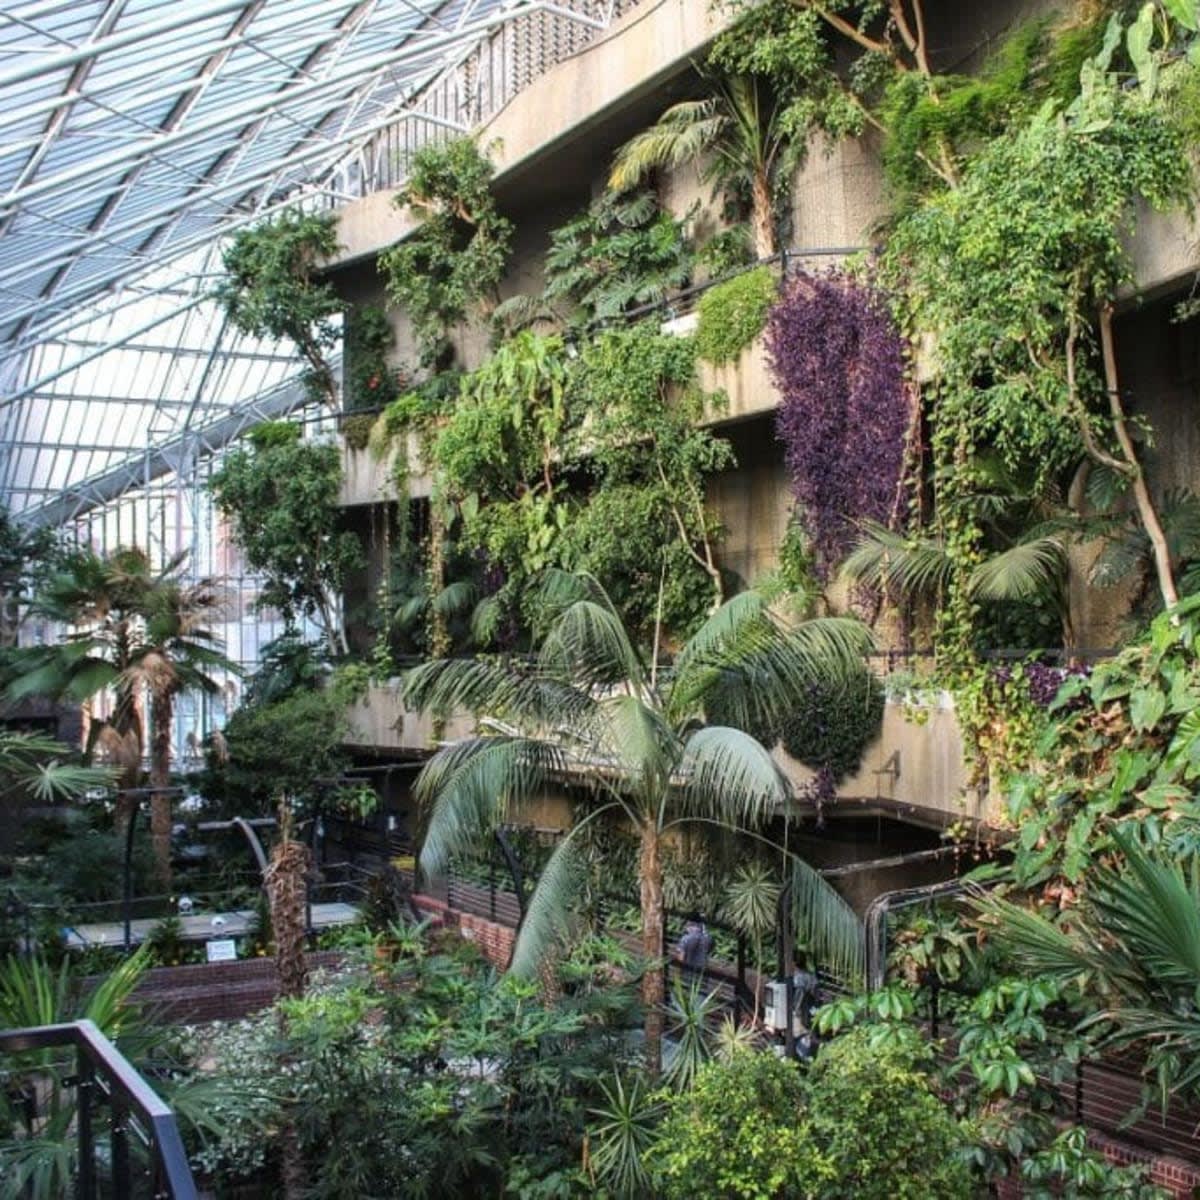 The Barbican Conservatory, London